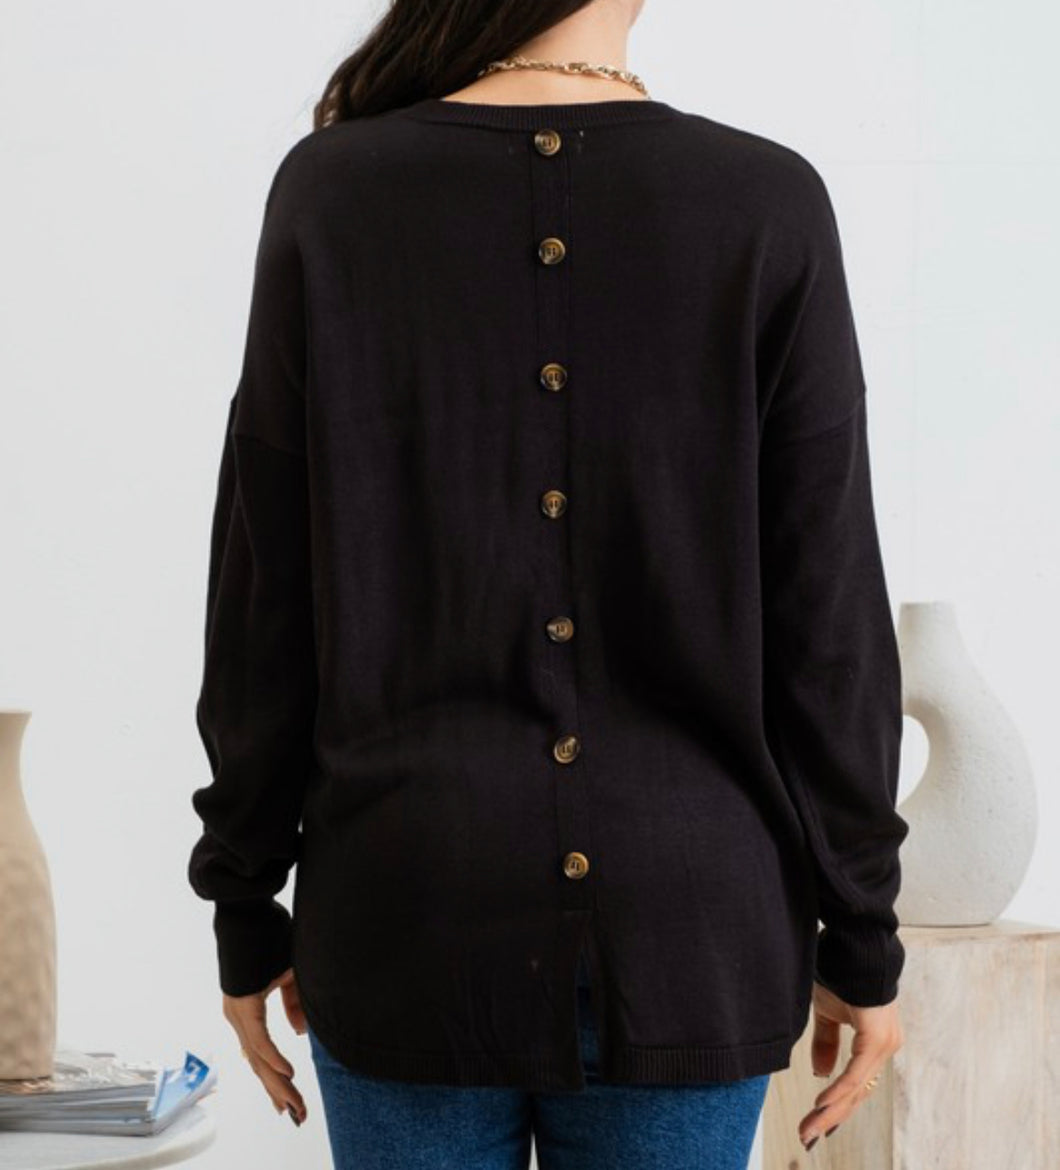 Black Pullover Sweater with Button Back Detail